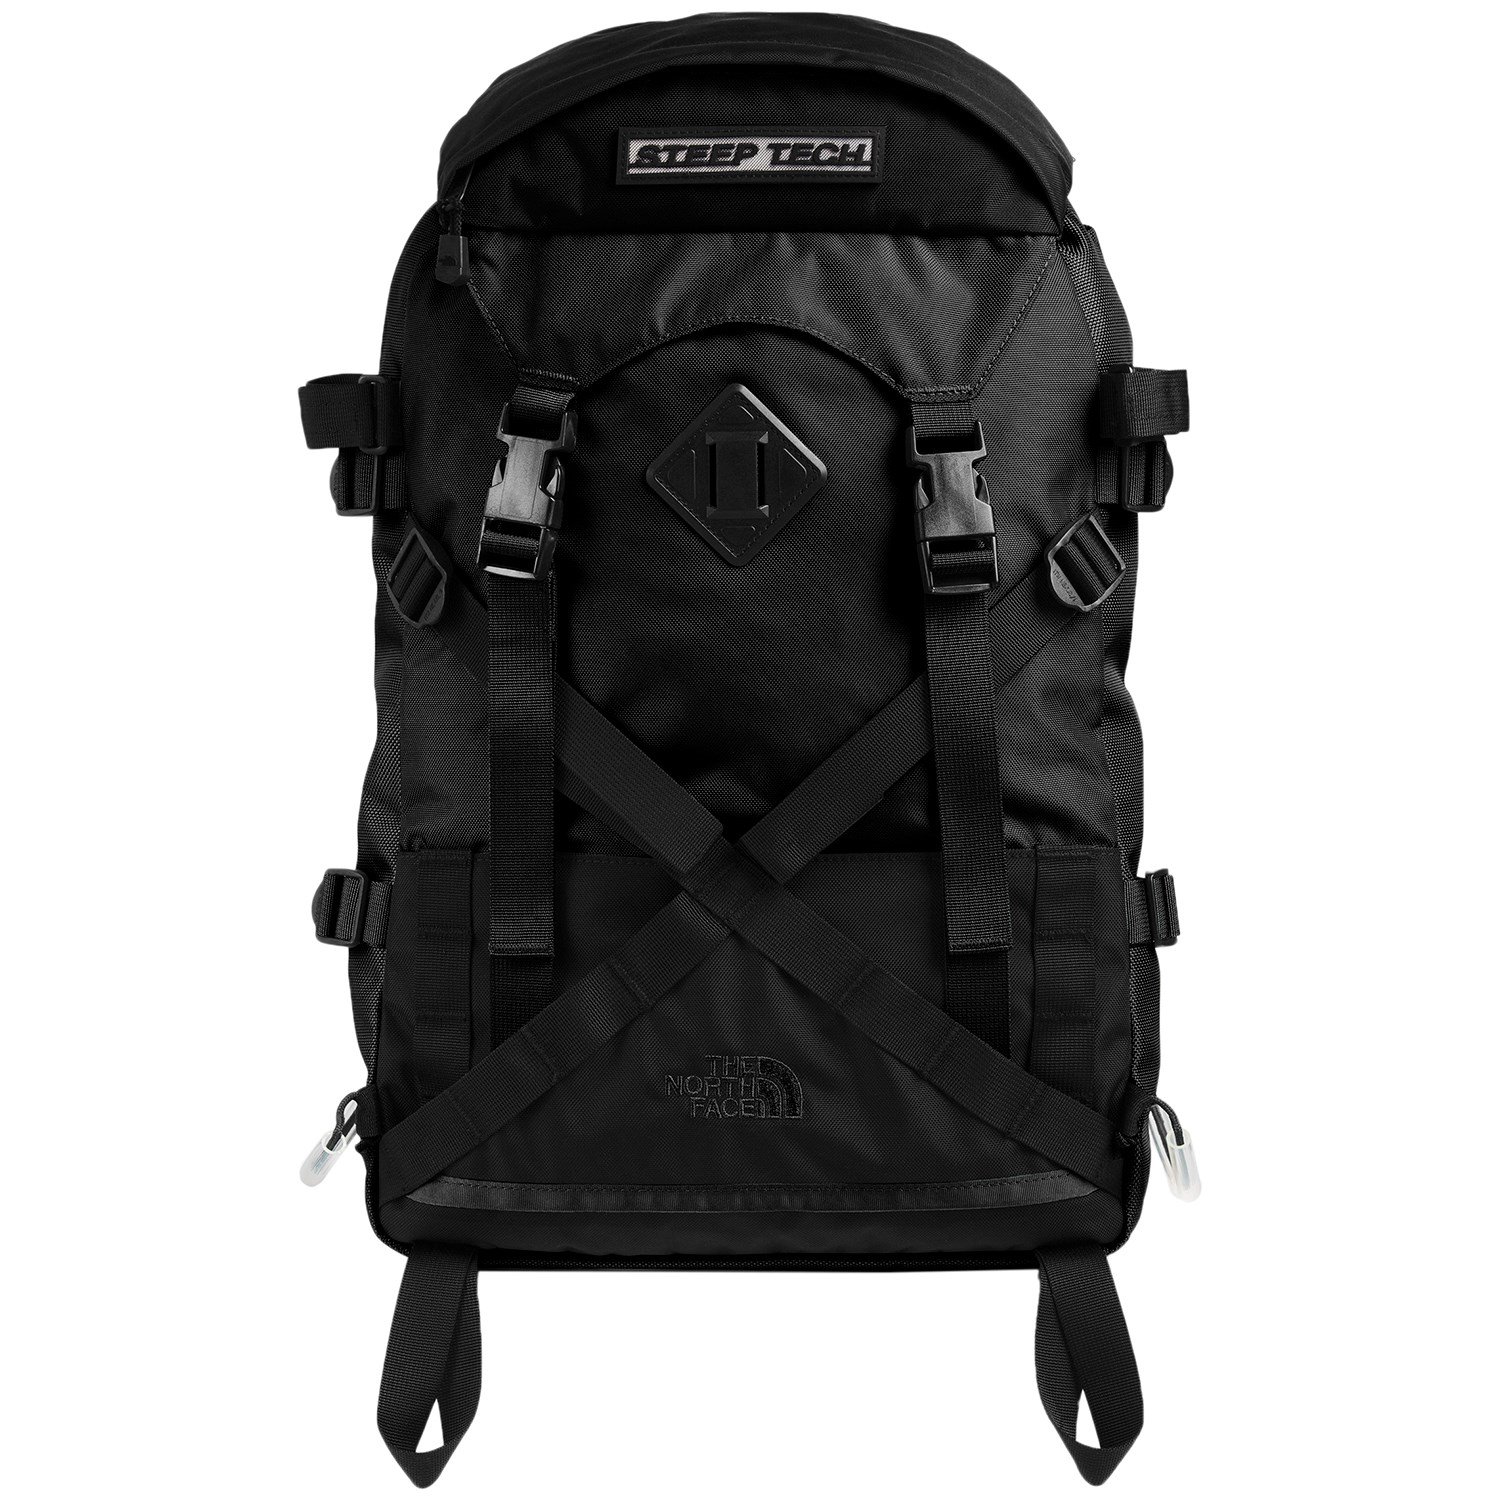 https://images.evo.com/imgp/zoom/178635/732136/the-north-face-steep-tech-pack-.jpg